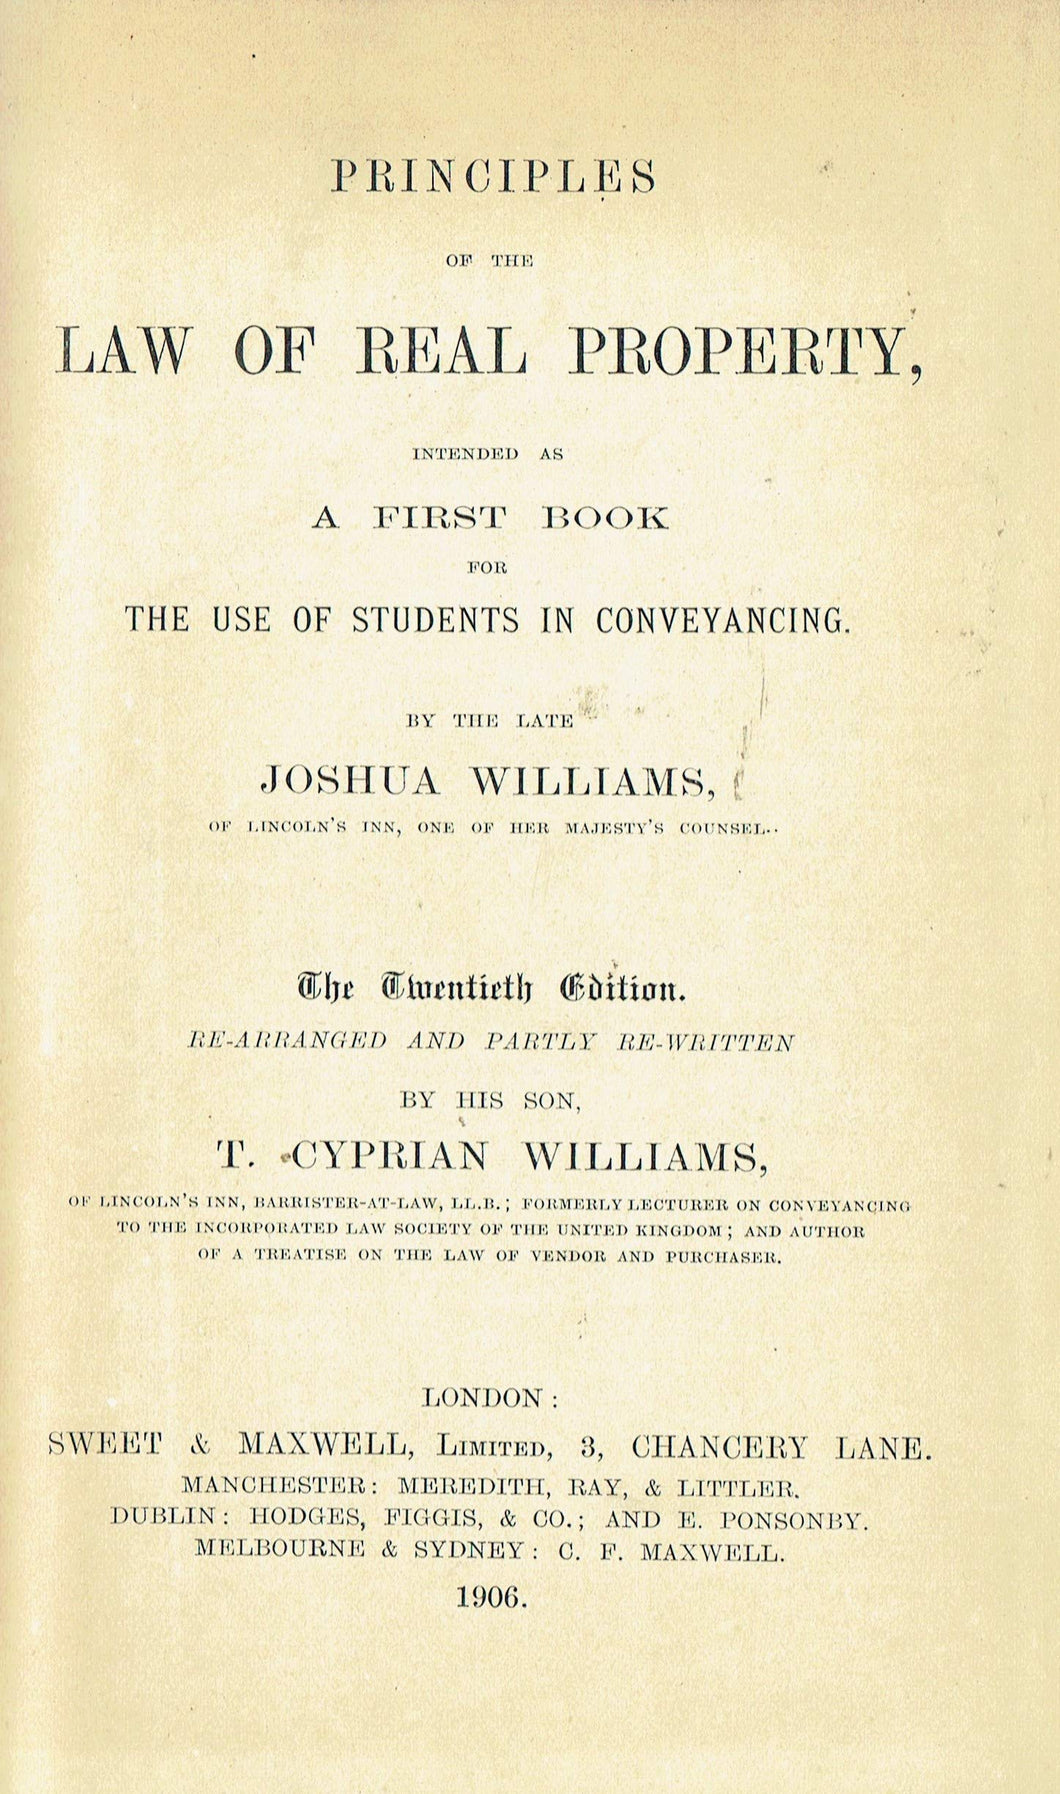 Williams on Real Property, Twentieth (20th) edition: Principles of the Law of Real Property intended as a First Book for the Use of Students in Conveyancing